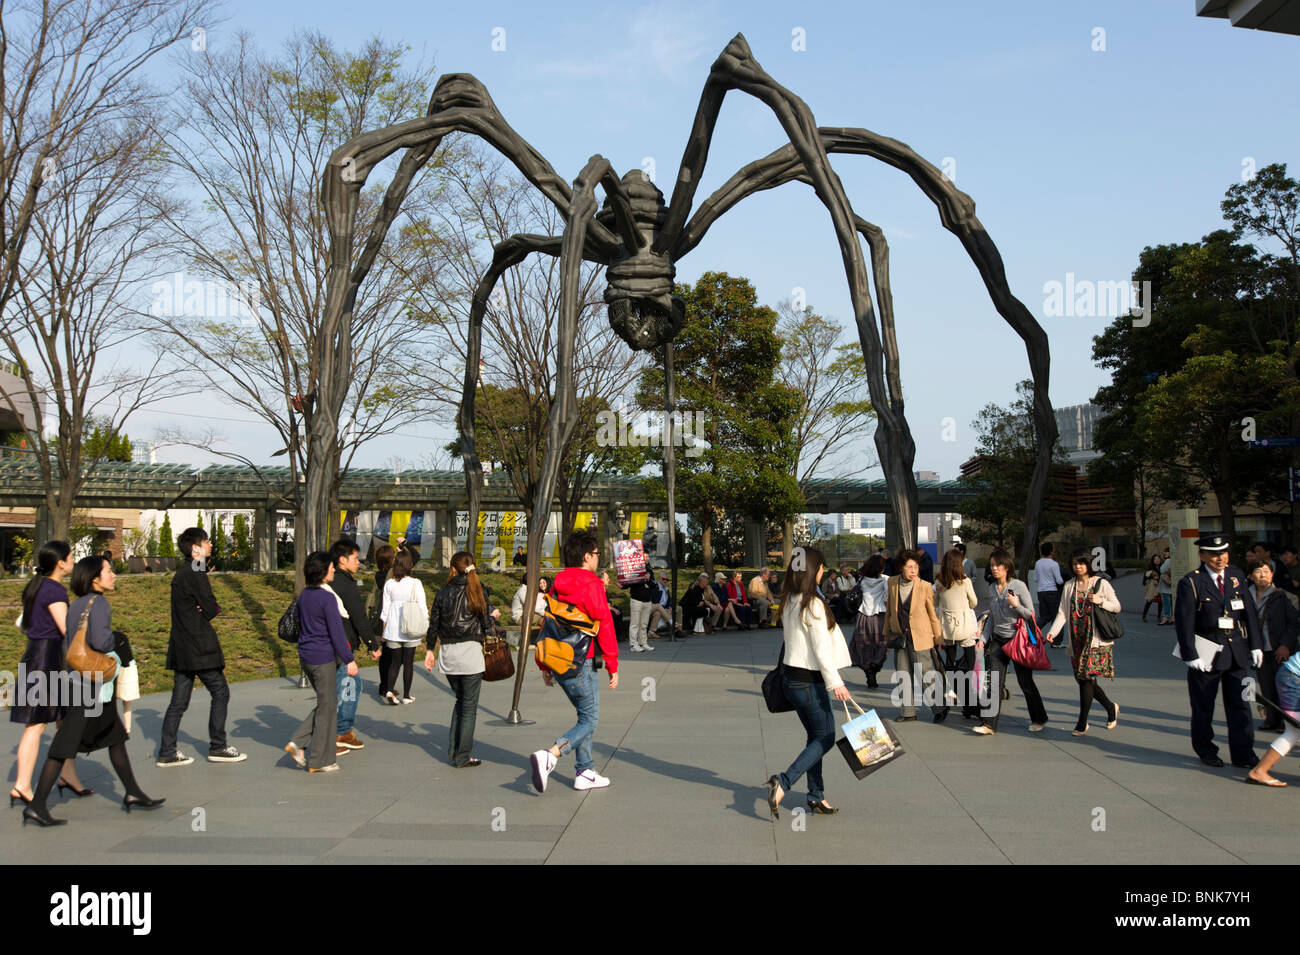 Maman spider sculpture by Louise Bourgeois at Roppongi Hills, Tokyo, Japan Stock Photo